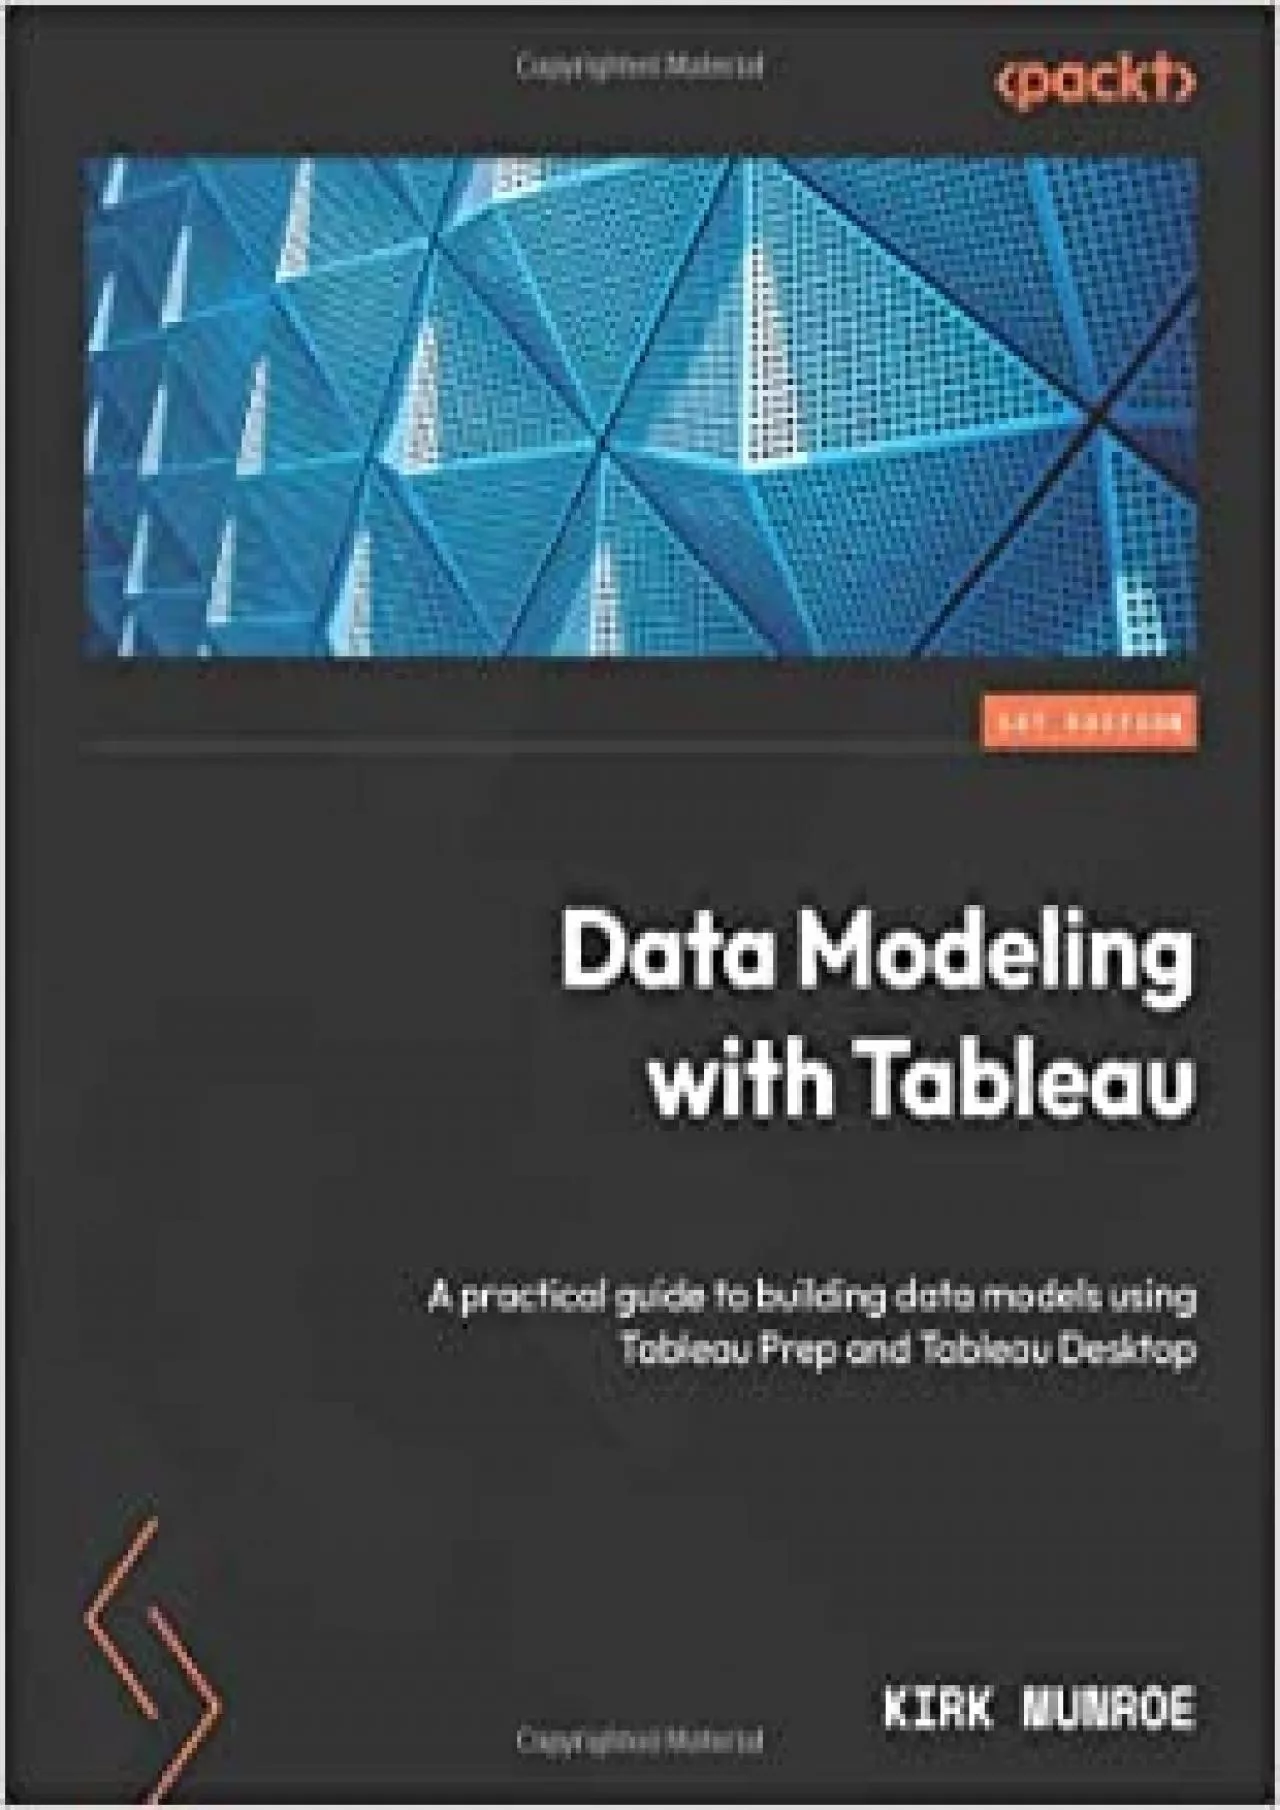 Data Modeling with Tableau: A practical guide to building data models using Tableau Prep